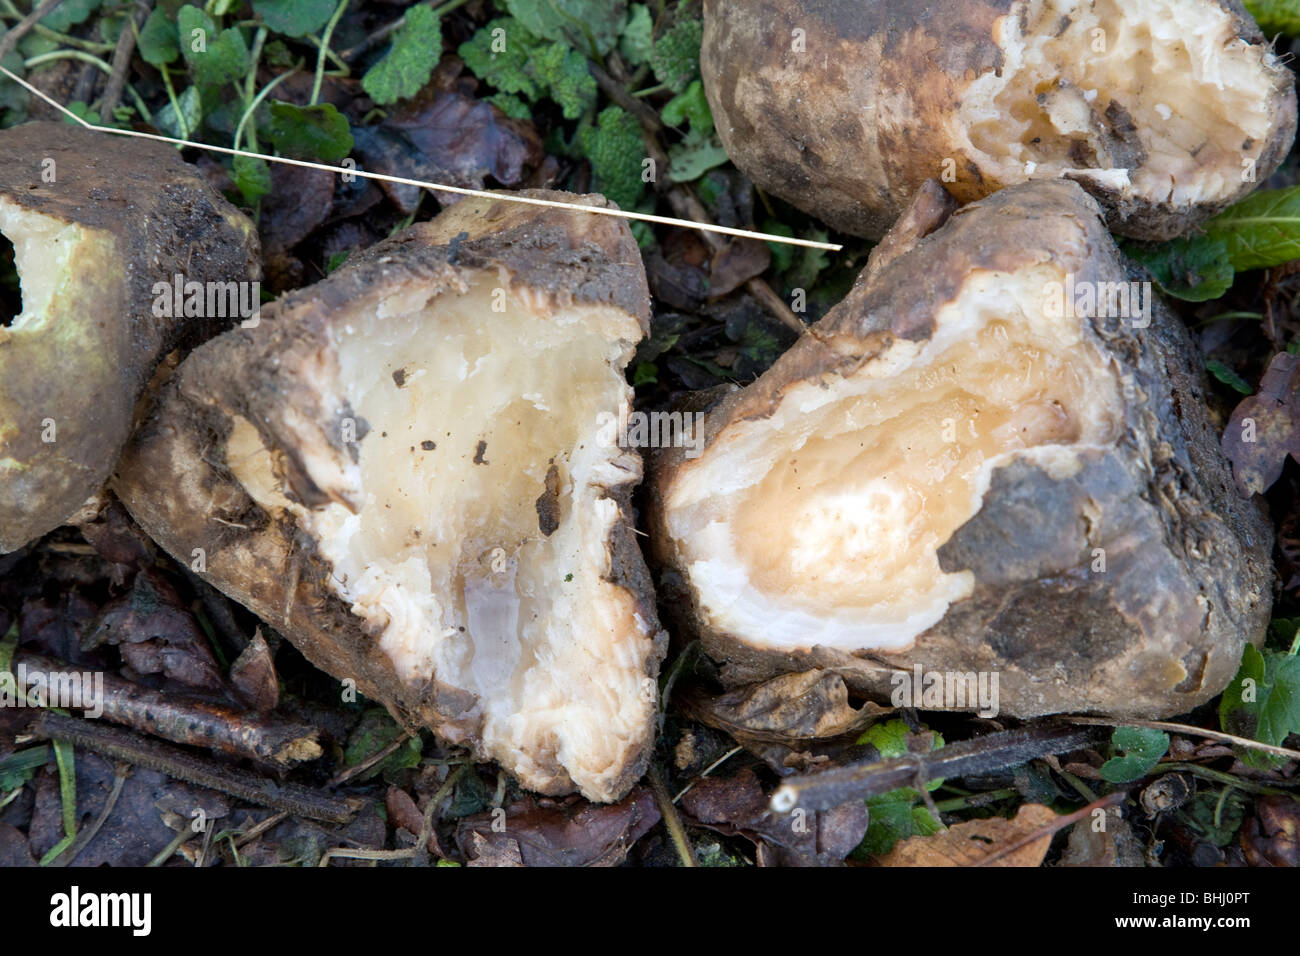 Sugar beet with teeth marks gnawed by rats and other rodents Stock Photo